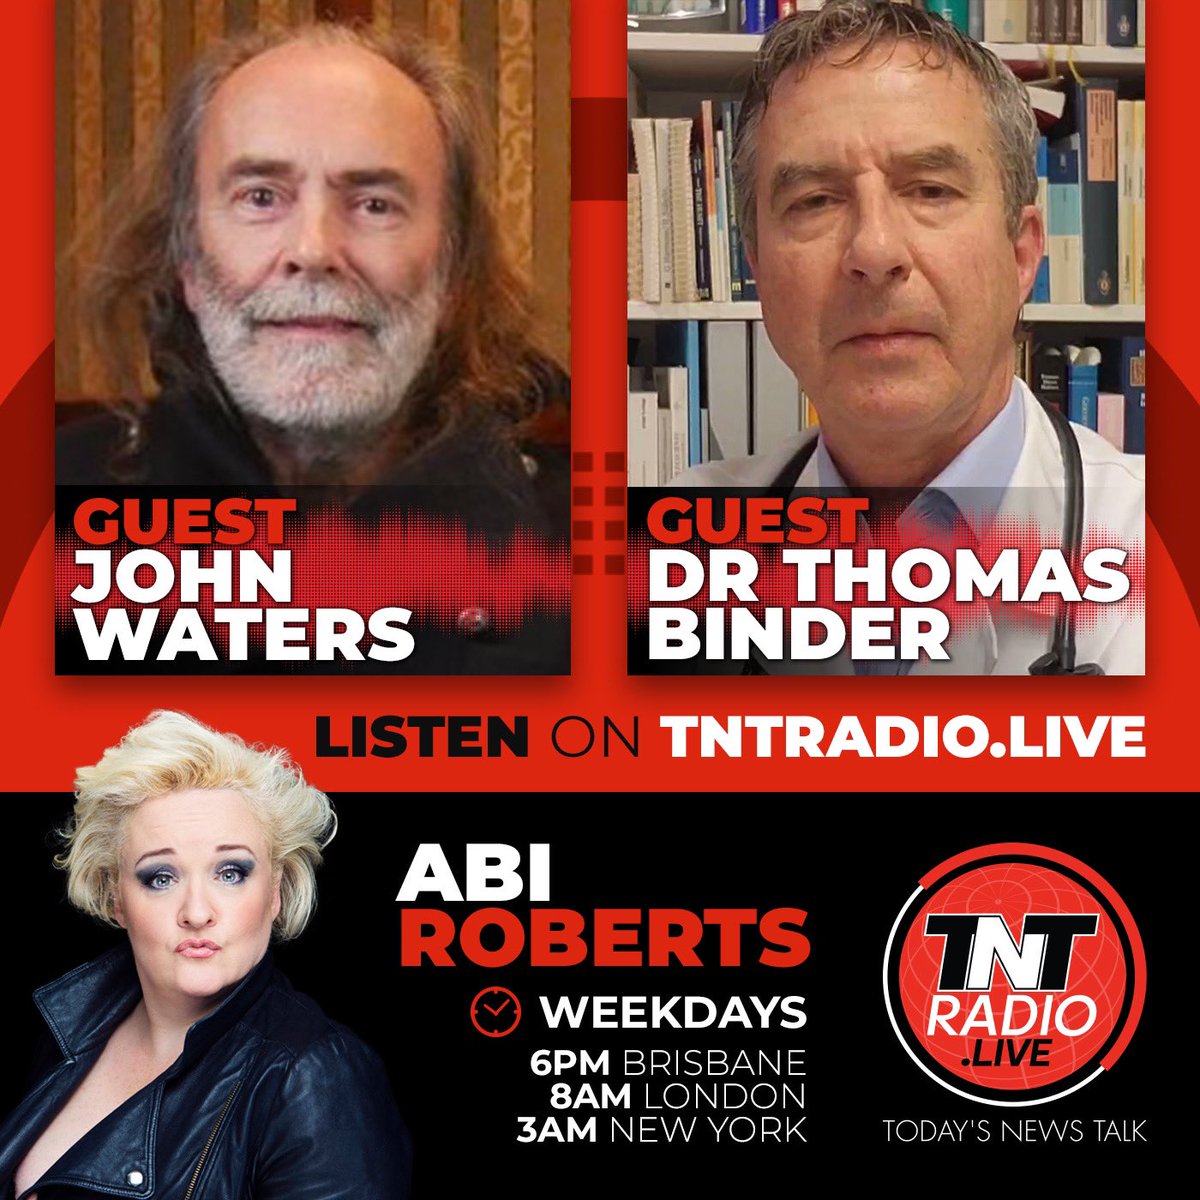 Coming up at in the next few minutes on @abiroberts show on tntradio.live we have the incredible John Waters and @Thomas_Binder 😊 Tune in!